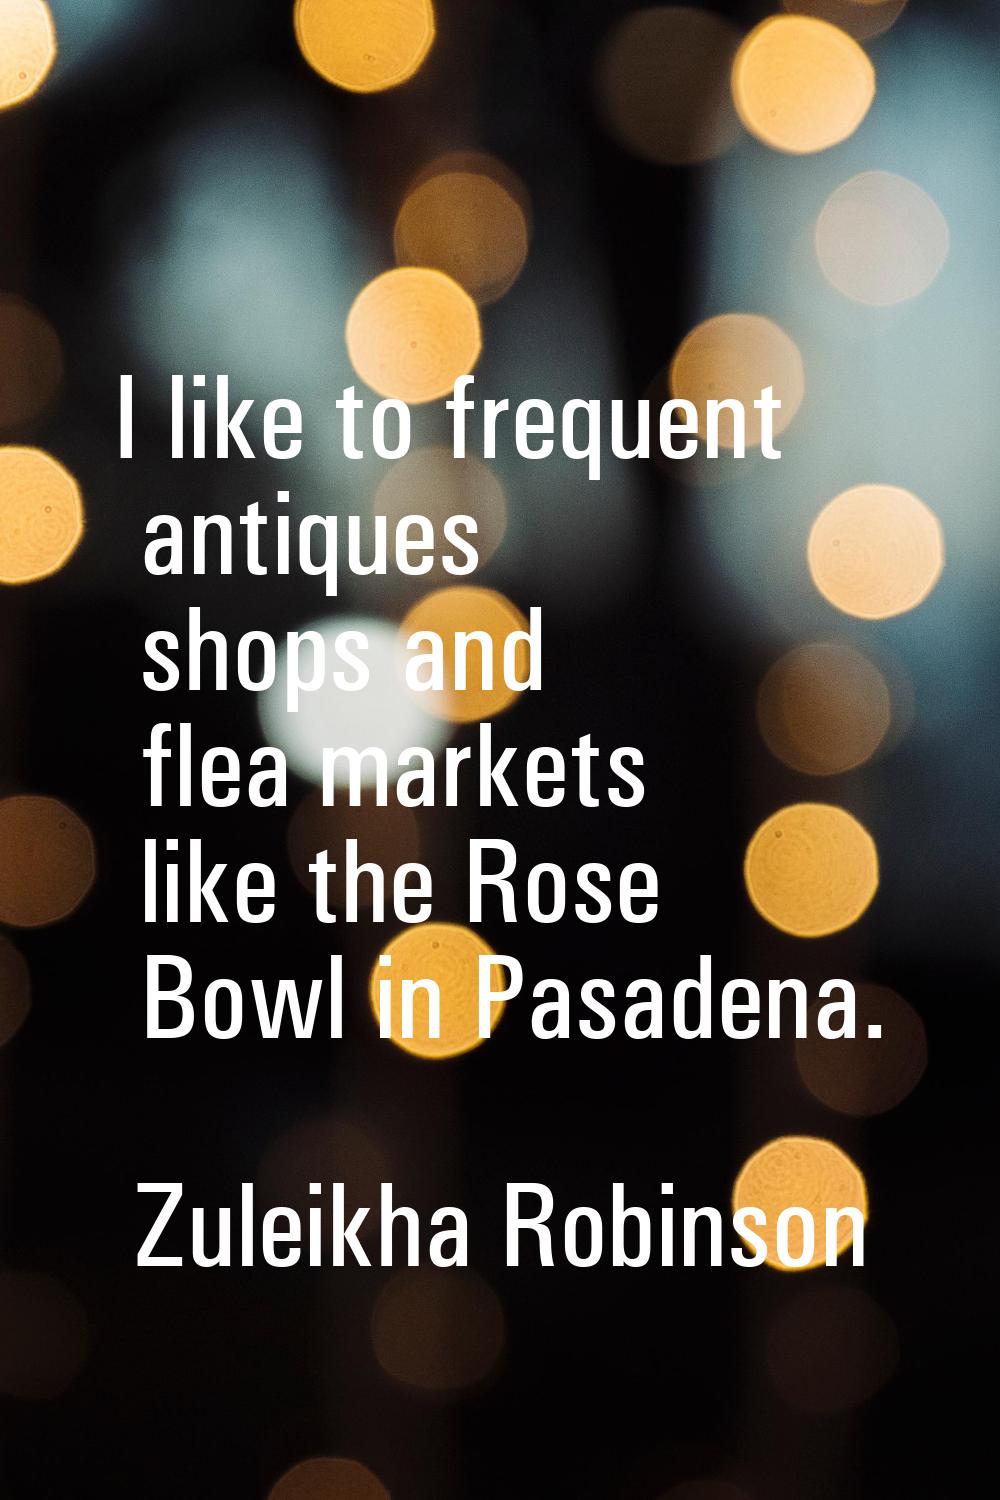 I like to frequent antiques shops and flea markets like the Rose Bowl in Pasadena.